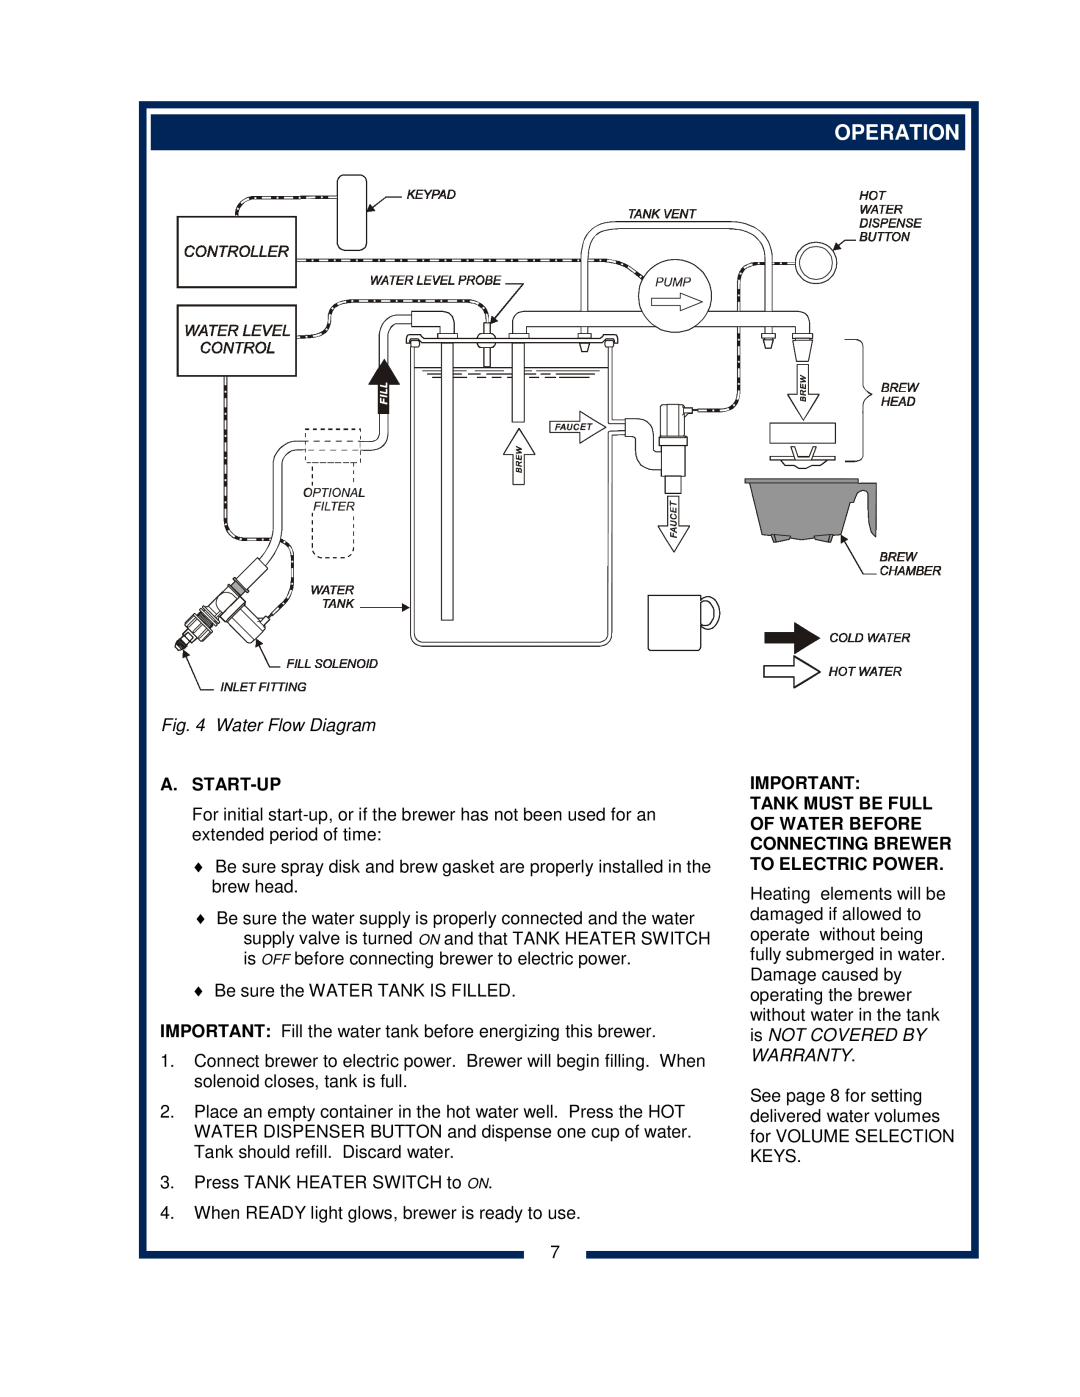 Bloomfield 0420 owner manual Operation, Water Flow Diagram, A. Start-Up 